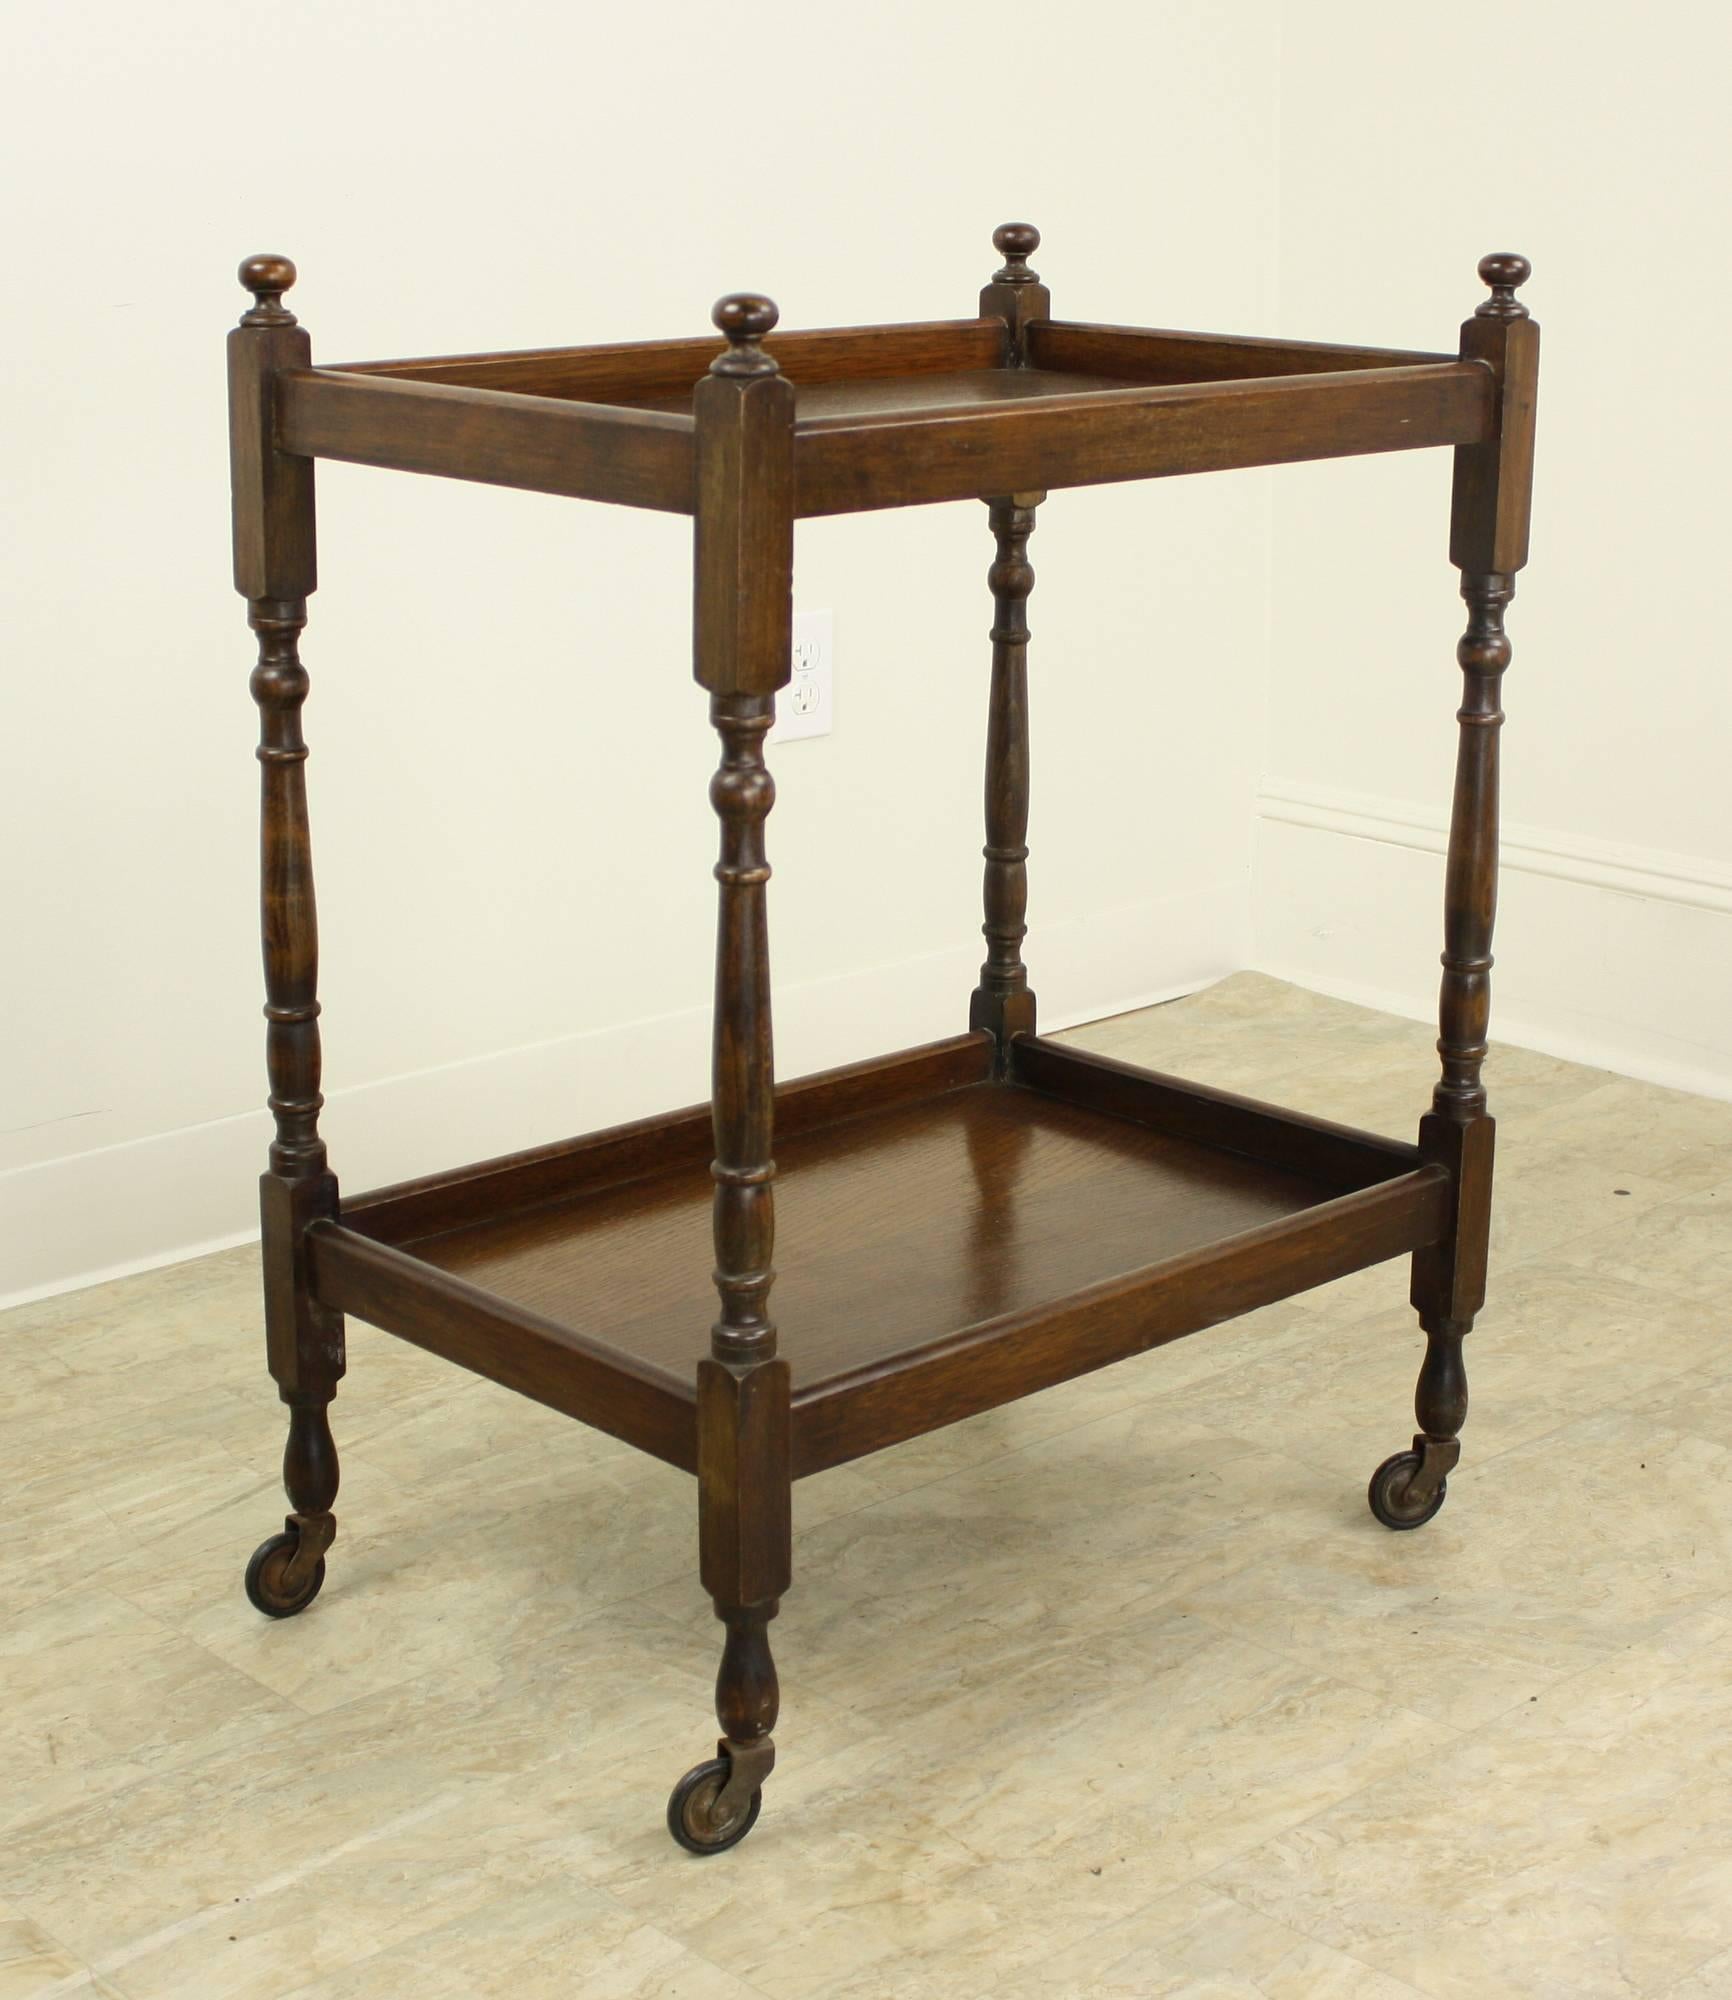 Elegant two-tier bar cart. Rich oak, with decorative barley twist legs and charming finials. Original castors. There are 19" between the shelves. This cart would make an interesting end table.